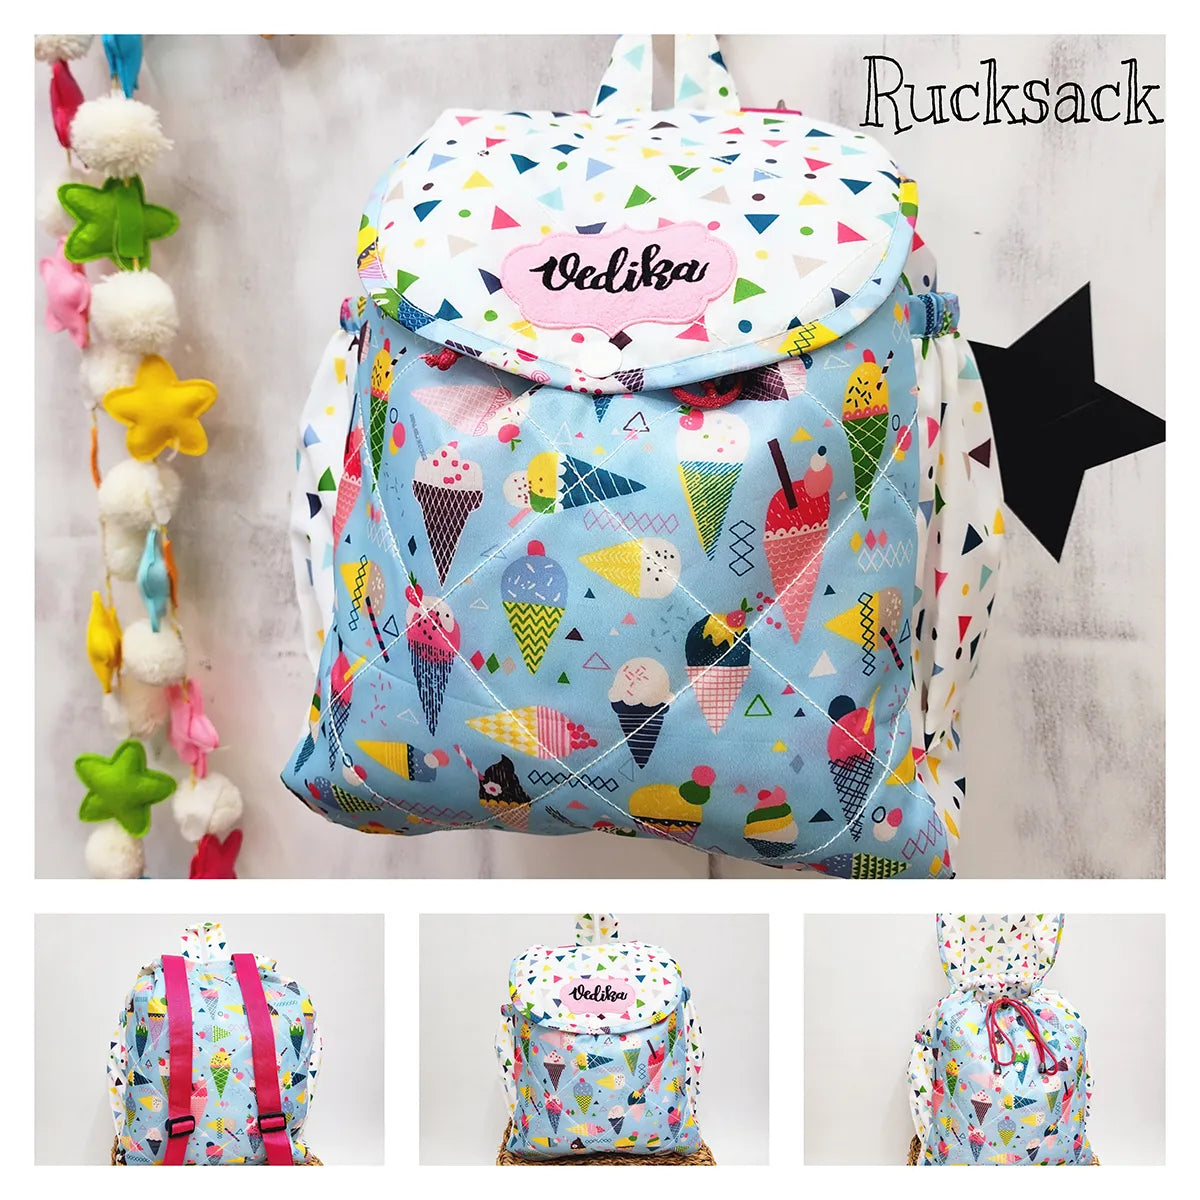 Ice-cream Rucksack Bag - Overview View